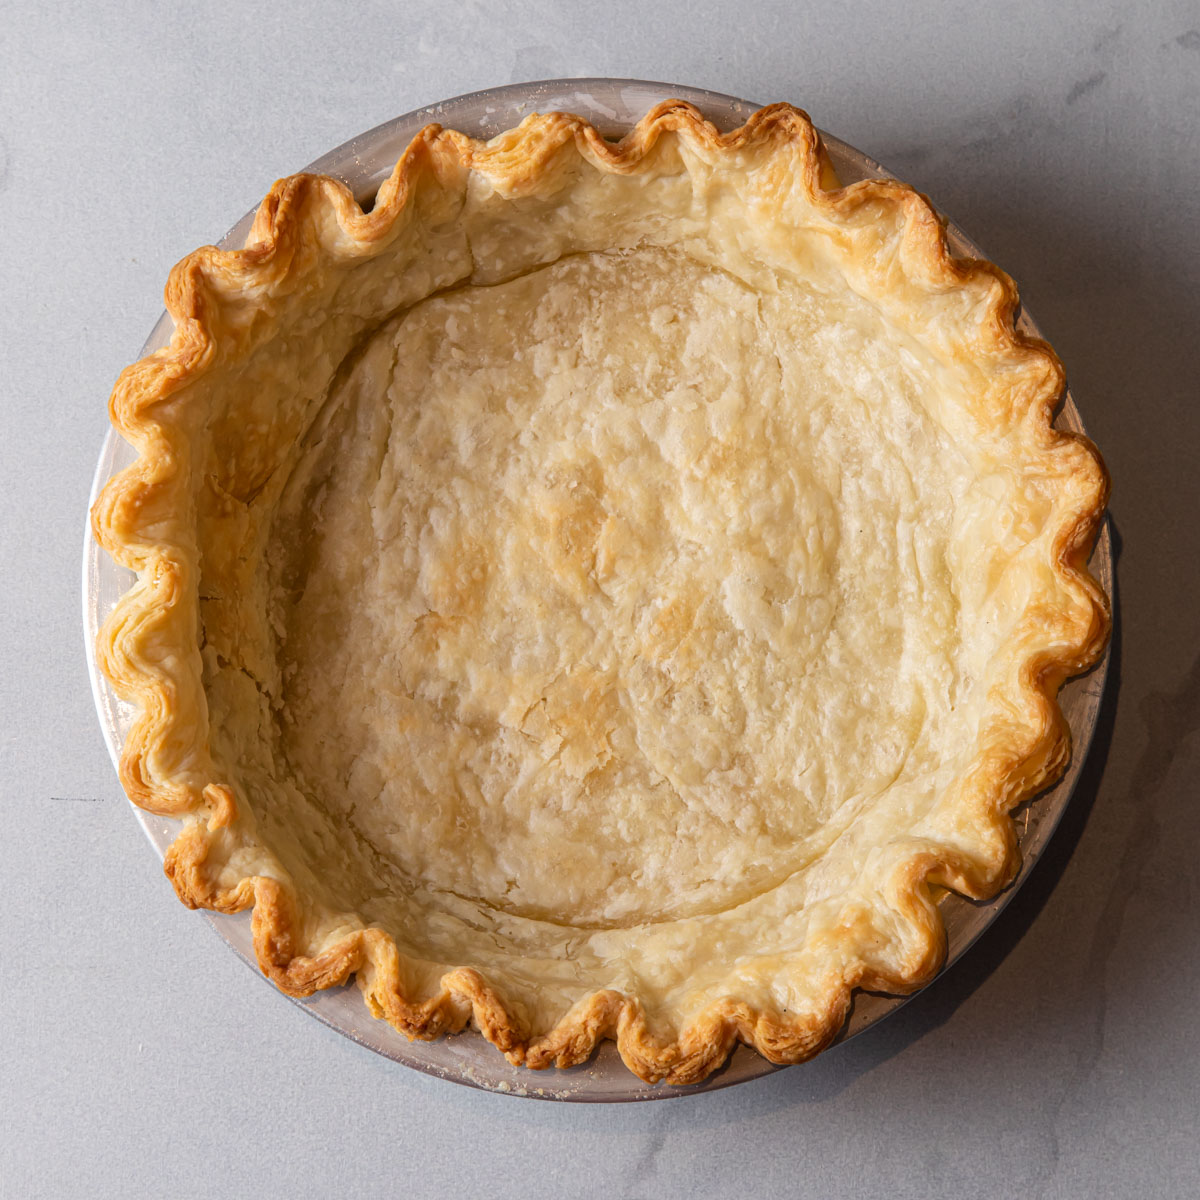 A baked, empty pie shell